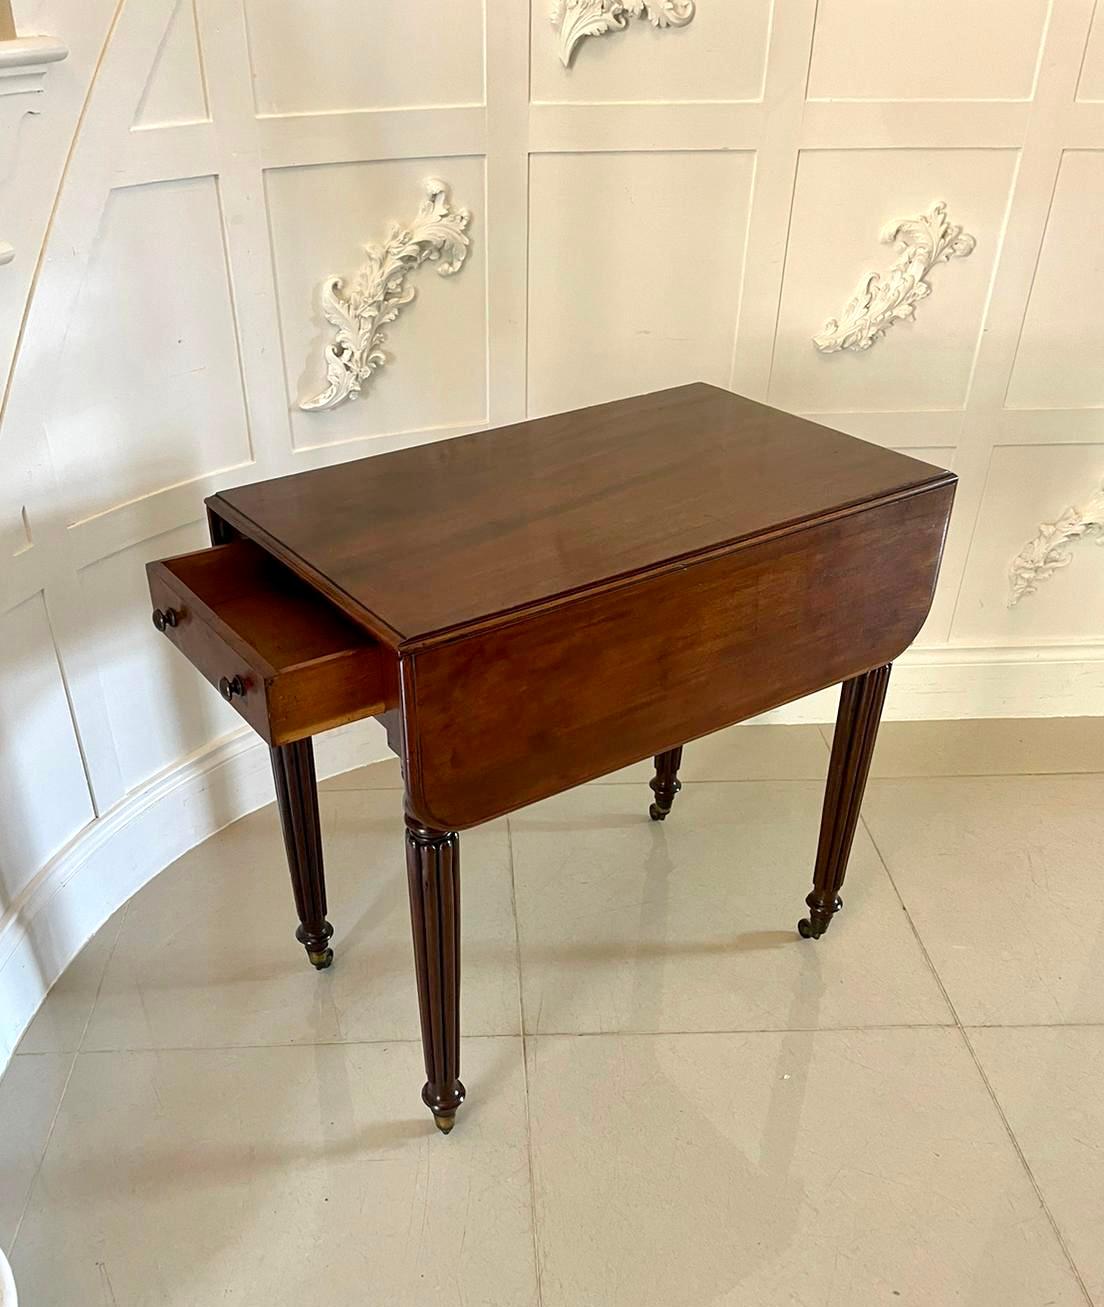 Antique regency quality mahogany Pembroke table having a quality mahogany top with two drop leaves and a molded edge above one working drawer and a dummy drawer with original turned mahogany knobs. It stands on elegant reeded tapering legs with